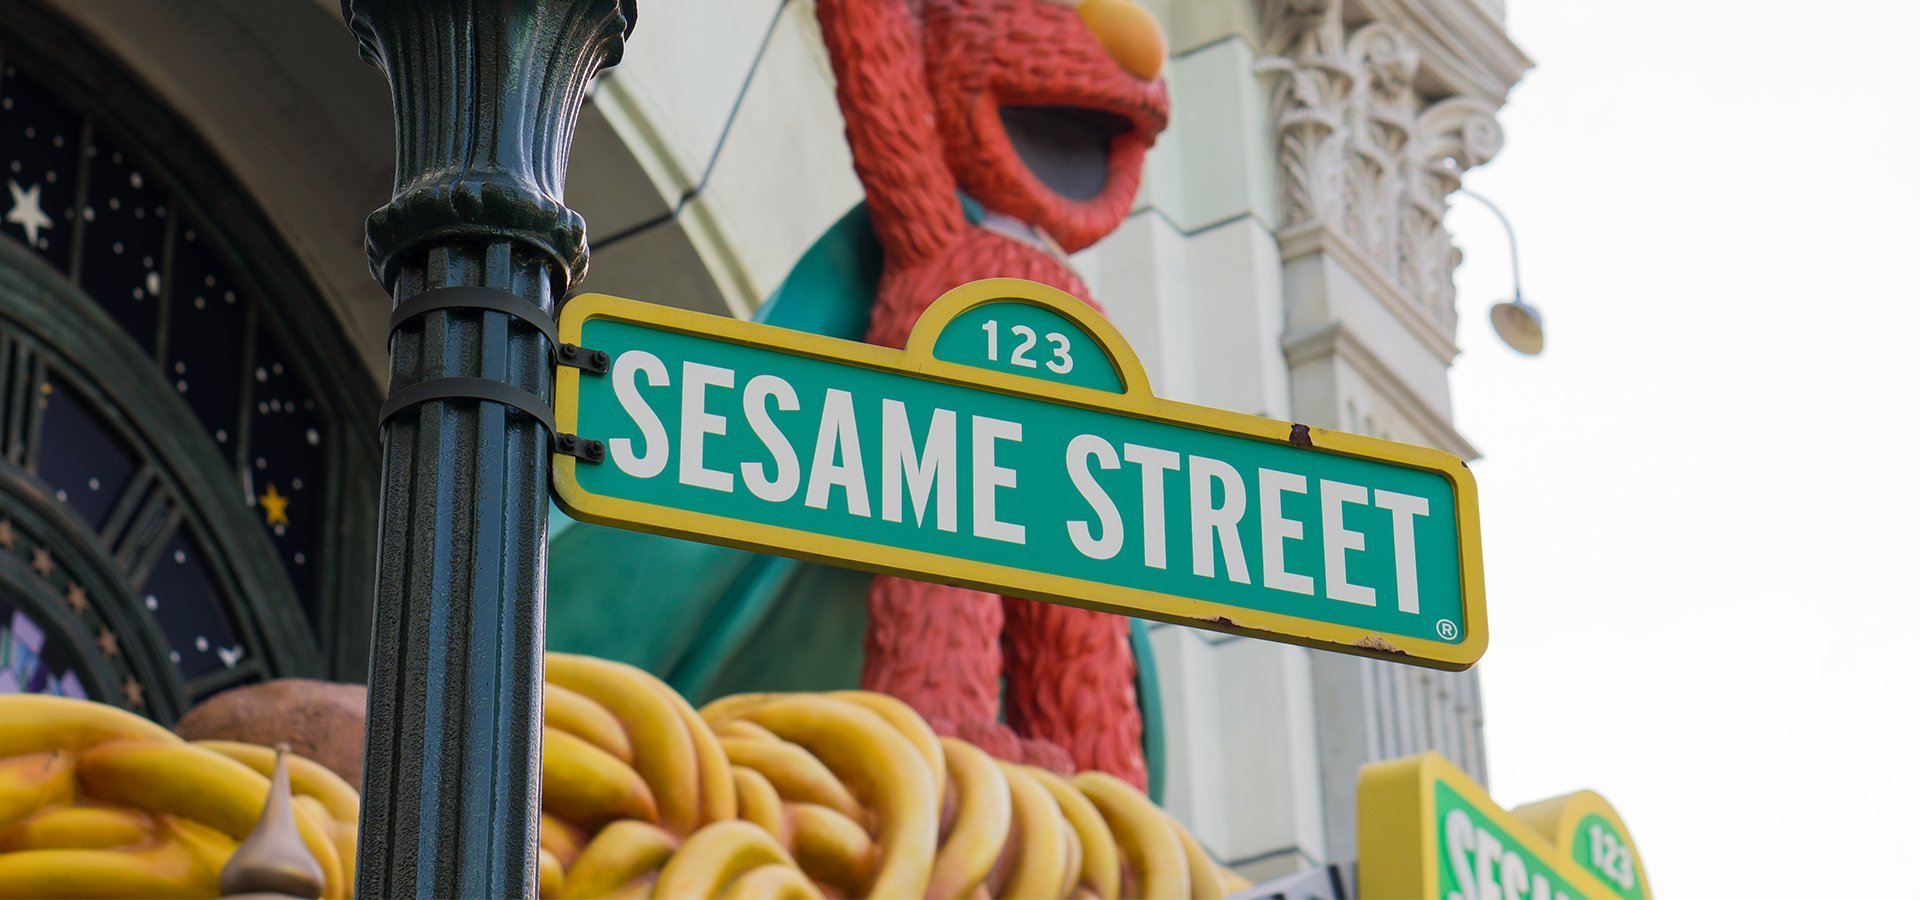 sesame street sign makes people wonder when should i talk to my kids about drugs